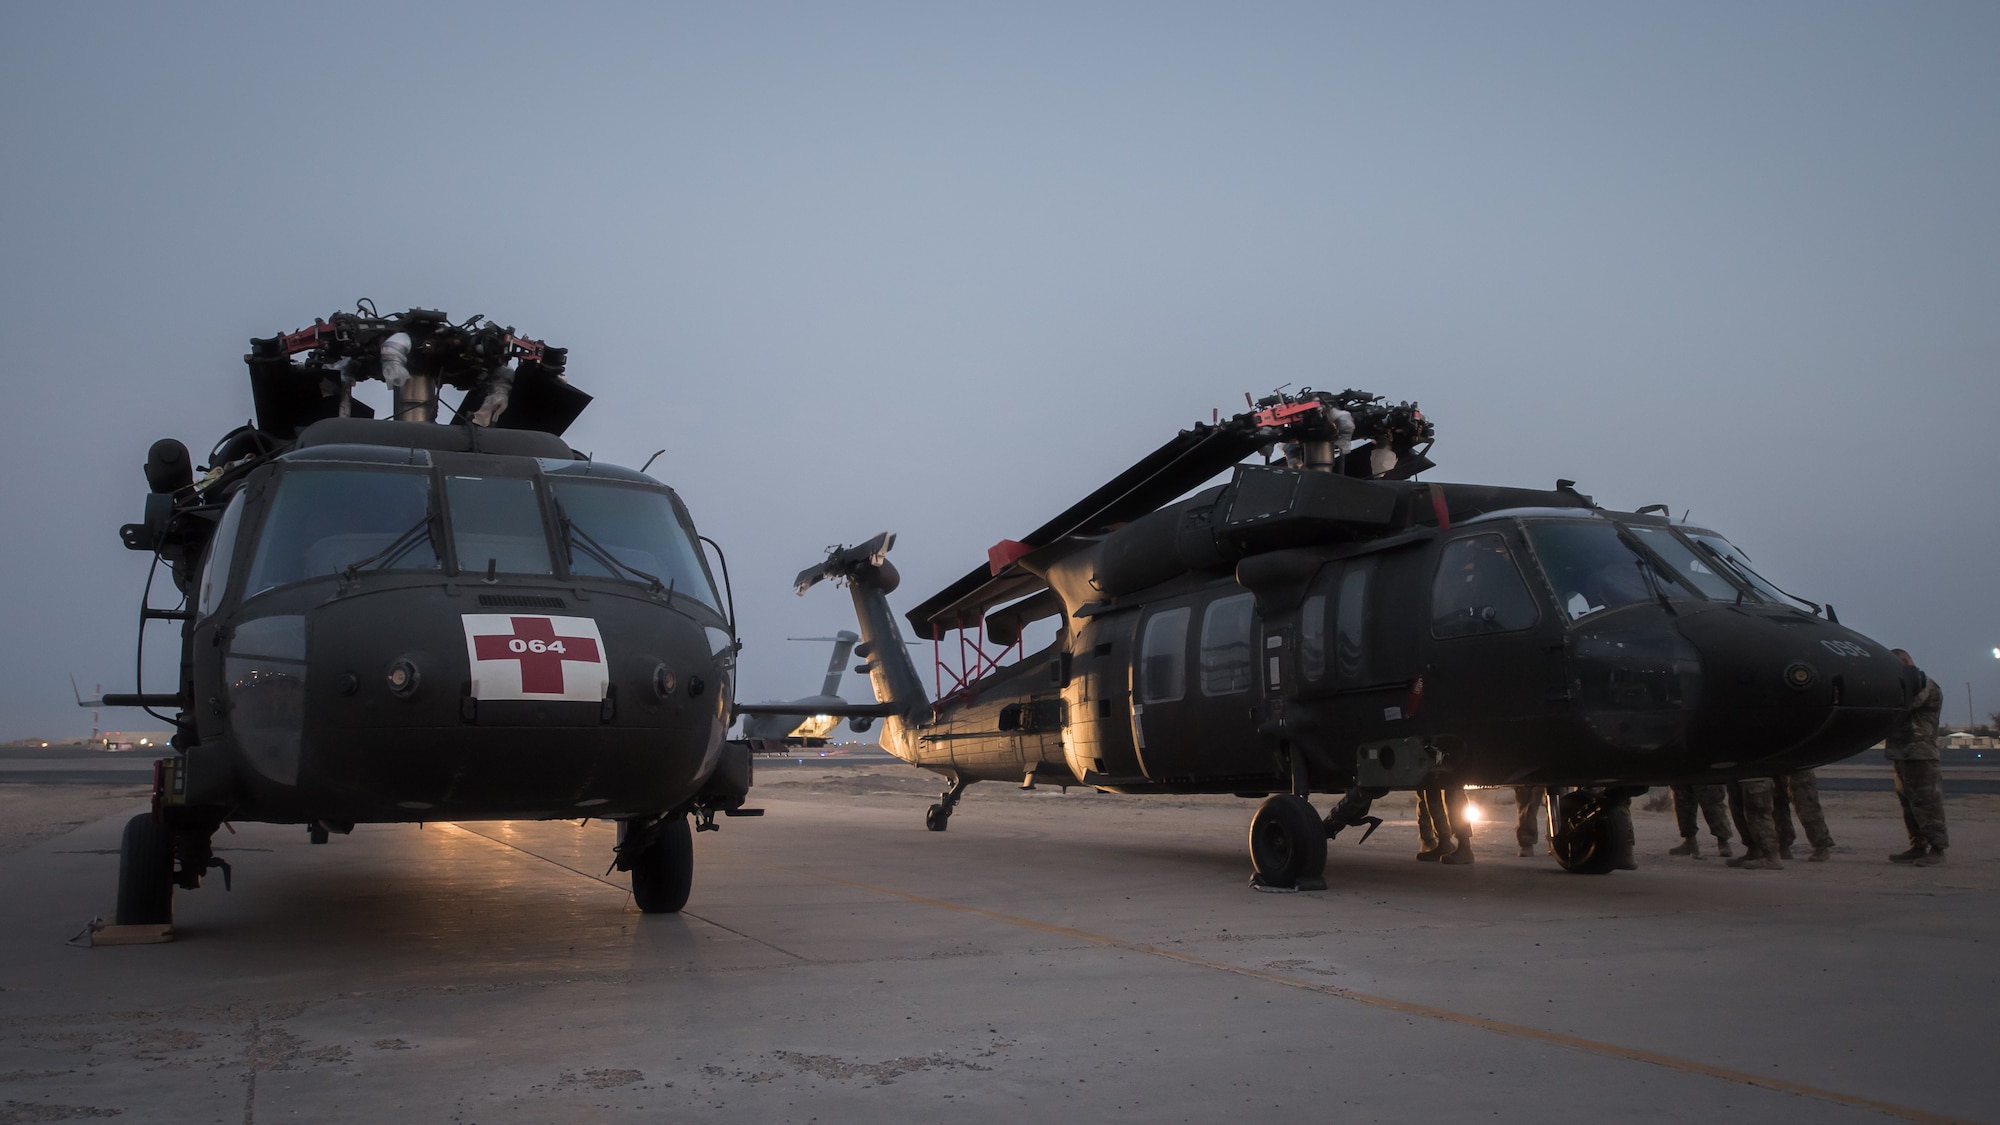 U.S. Airmen and Soldiers perform a joint inspection on two U.S. Army UH-60 Black Hawk helicopters at Ali al Salem Air Base, Kuwait, Aug. 9, 2019. Service members assigned to the 386th Expeditionary Logistics Readiness Squadron and the 8-229th Assault Helicopter Battalion inspect the Black Hawks to ensure they're airworthy to load onto U.S. Air Force owned C-17 Globemaster III aircraft. The Black Hawks will then undergo transport to a location within the U.S. Central Command area of responsibility. (U.S. Air Force photo by Tech. Sgt. Daniel Martinez)